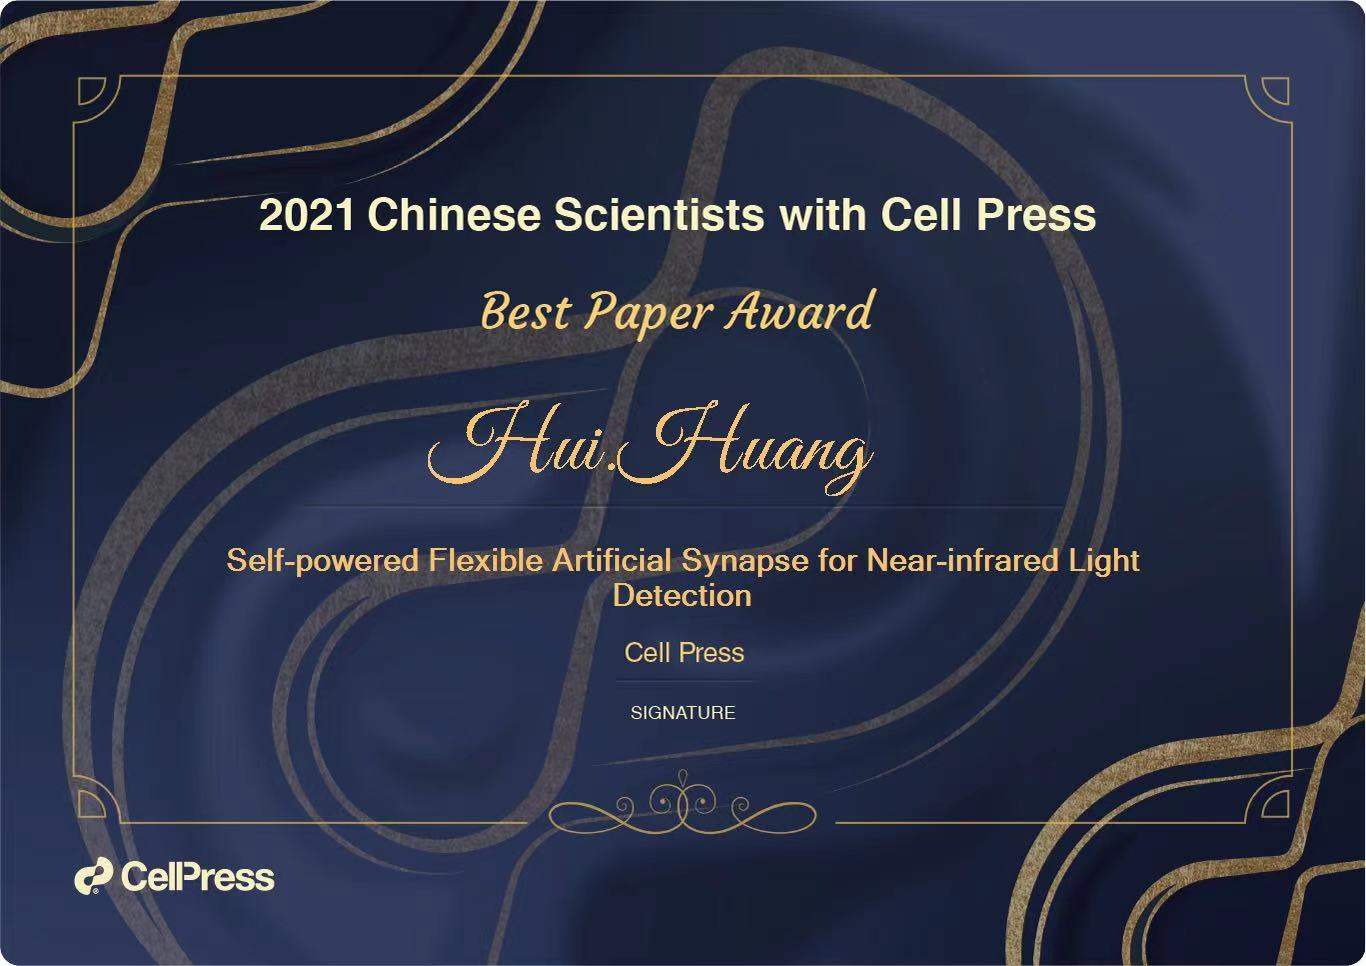 Congratulations to group’s photoelectric synapse research for receiving "2021 Chinese Scientists with Cell Press Best Paper Award" price